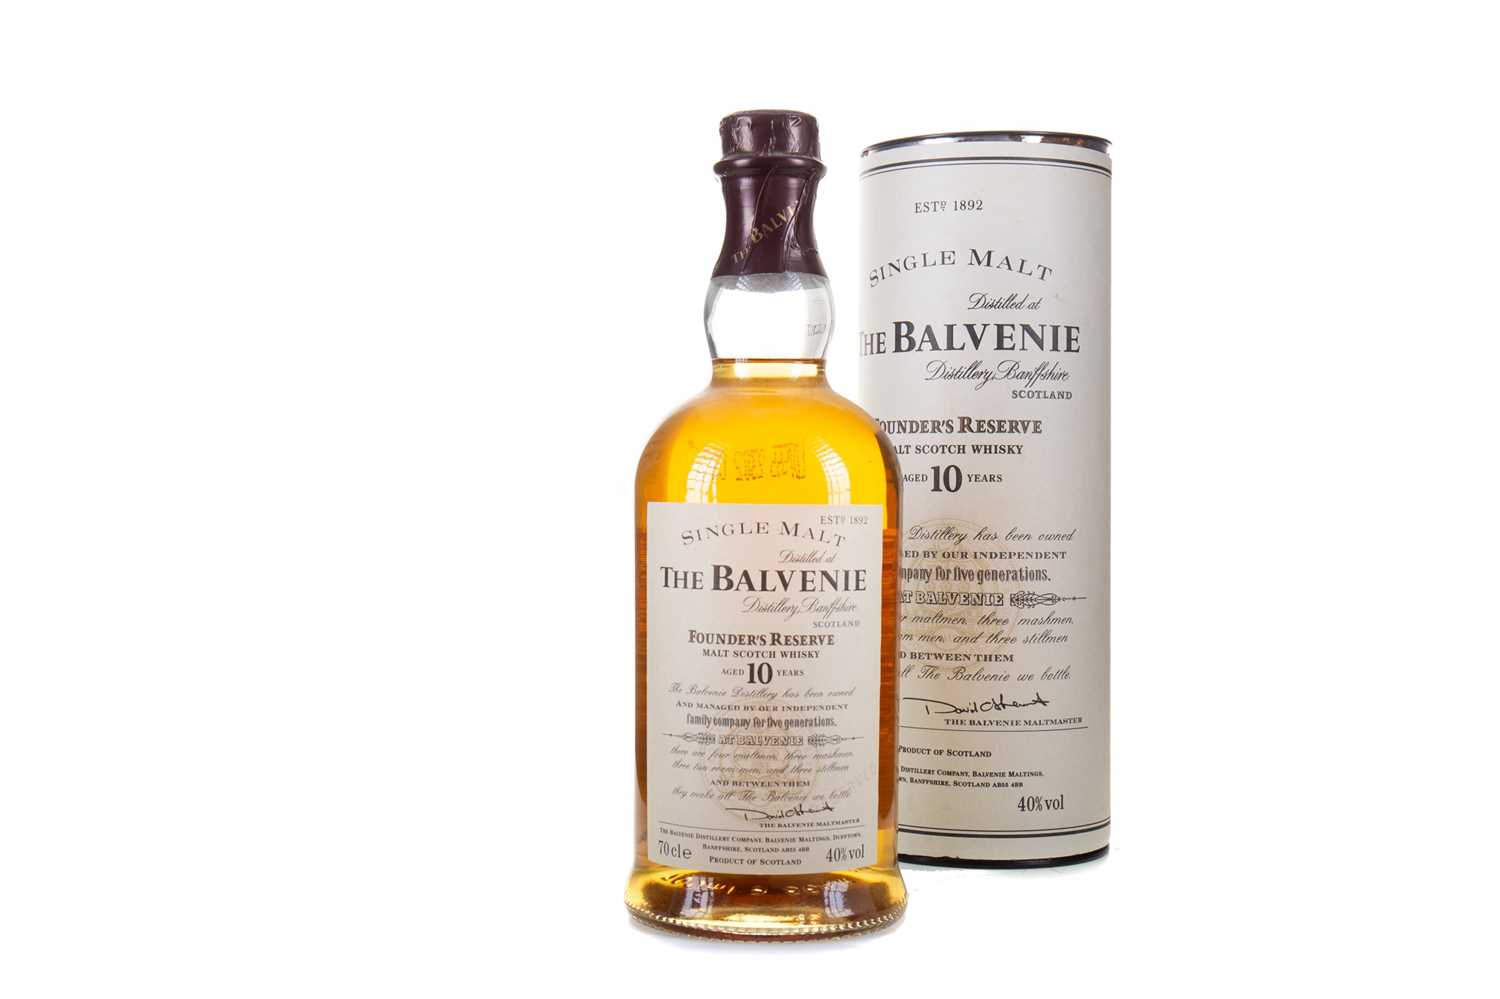 Lot 10 - BALVENIE 10 YEAR OLD FOUNDER'S RESERVE